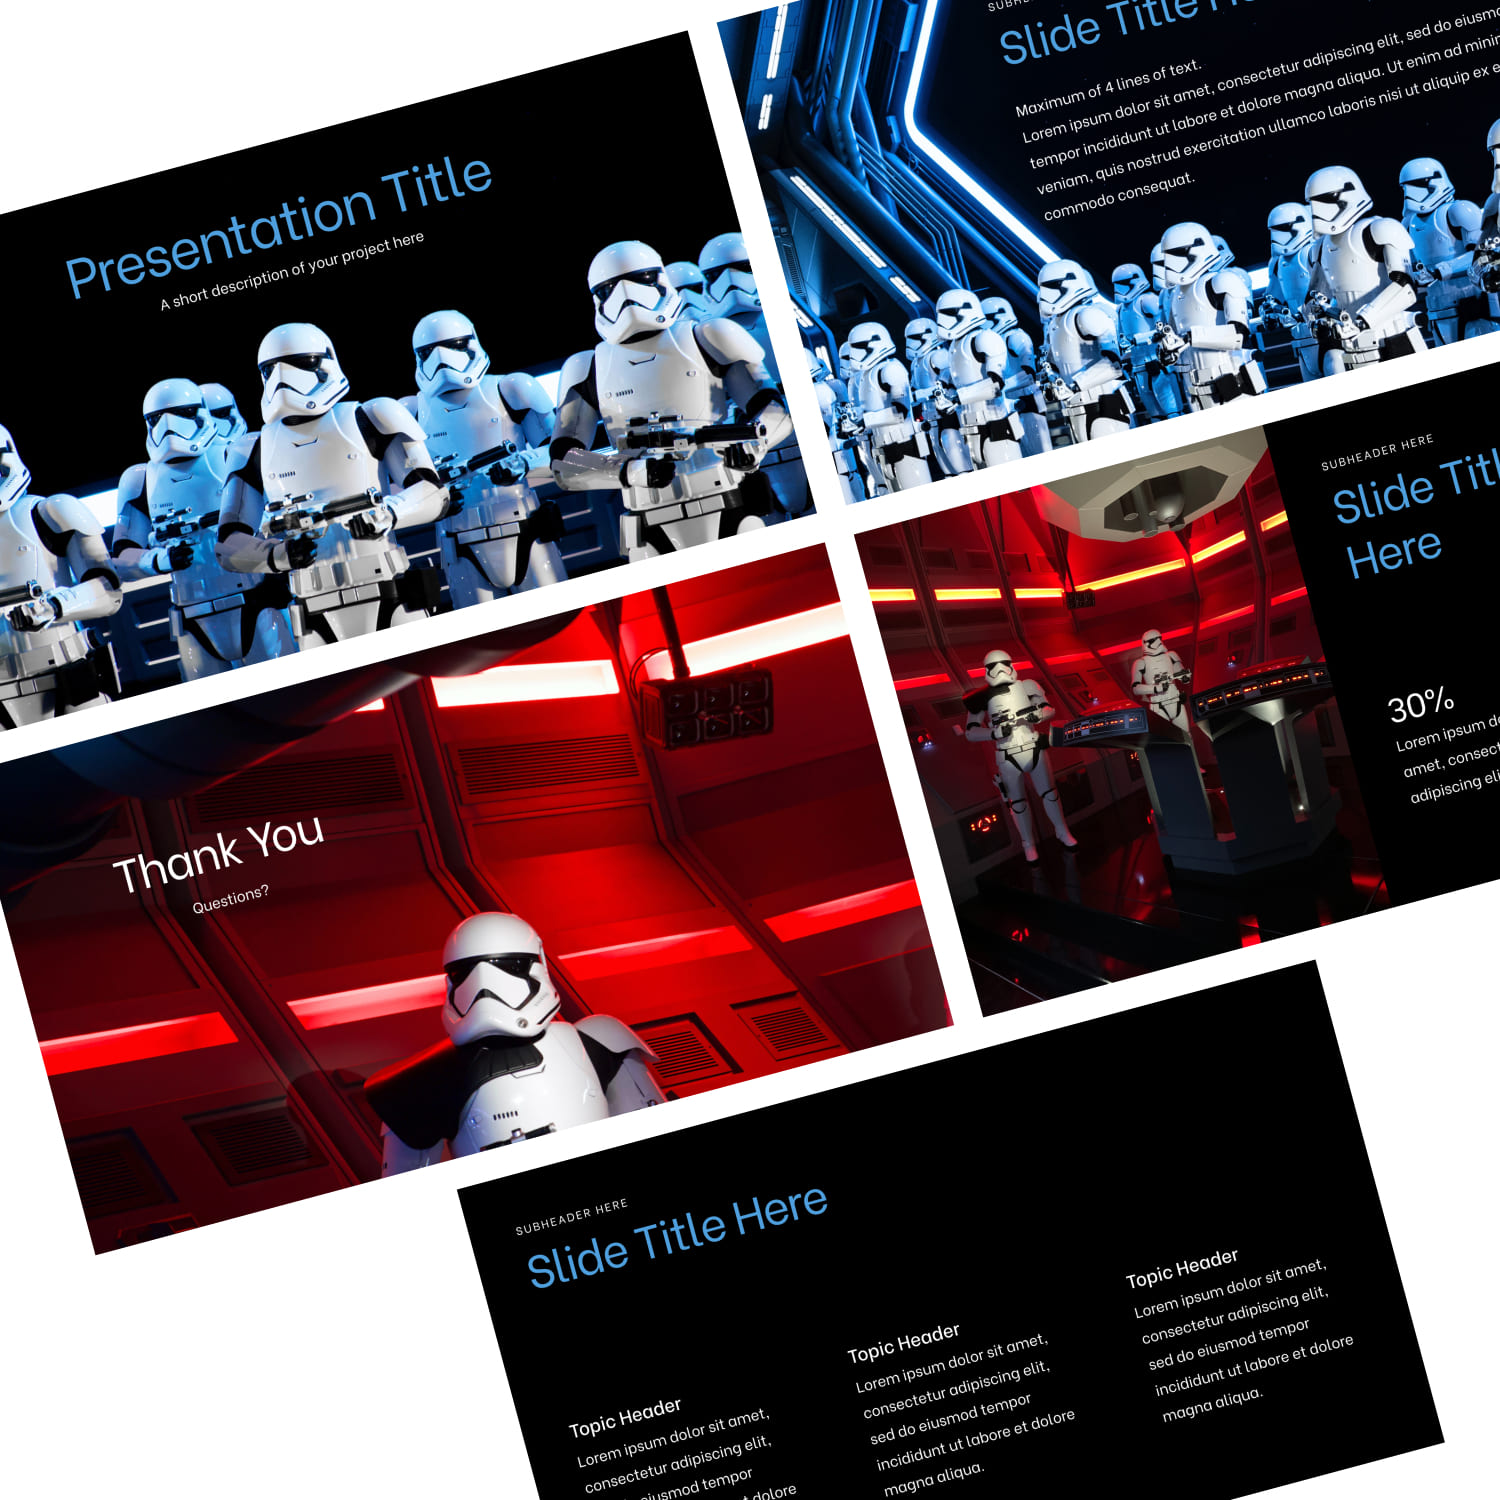 Preview Star Wars Powerpoint Template.